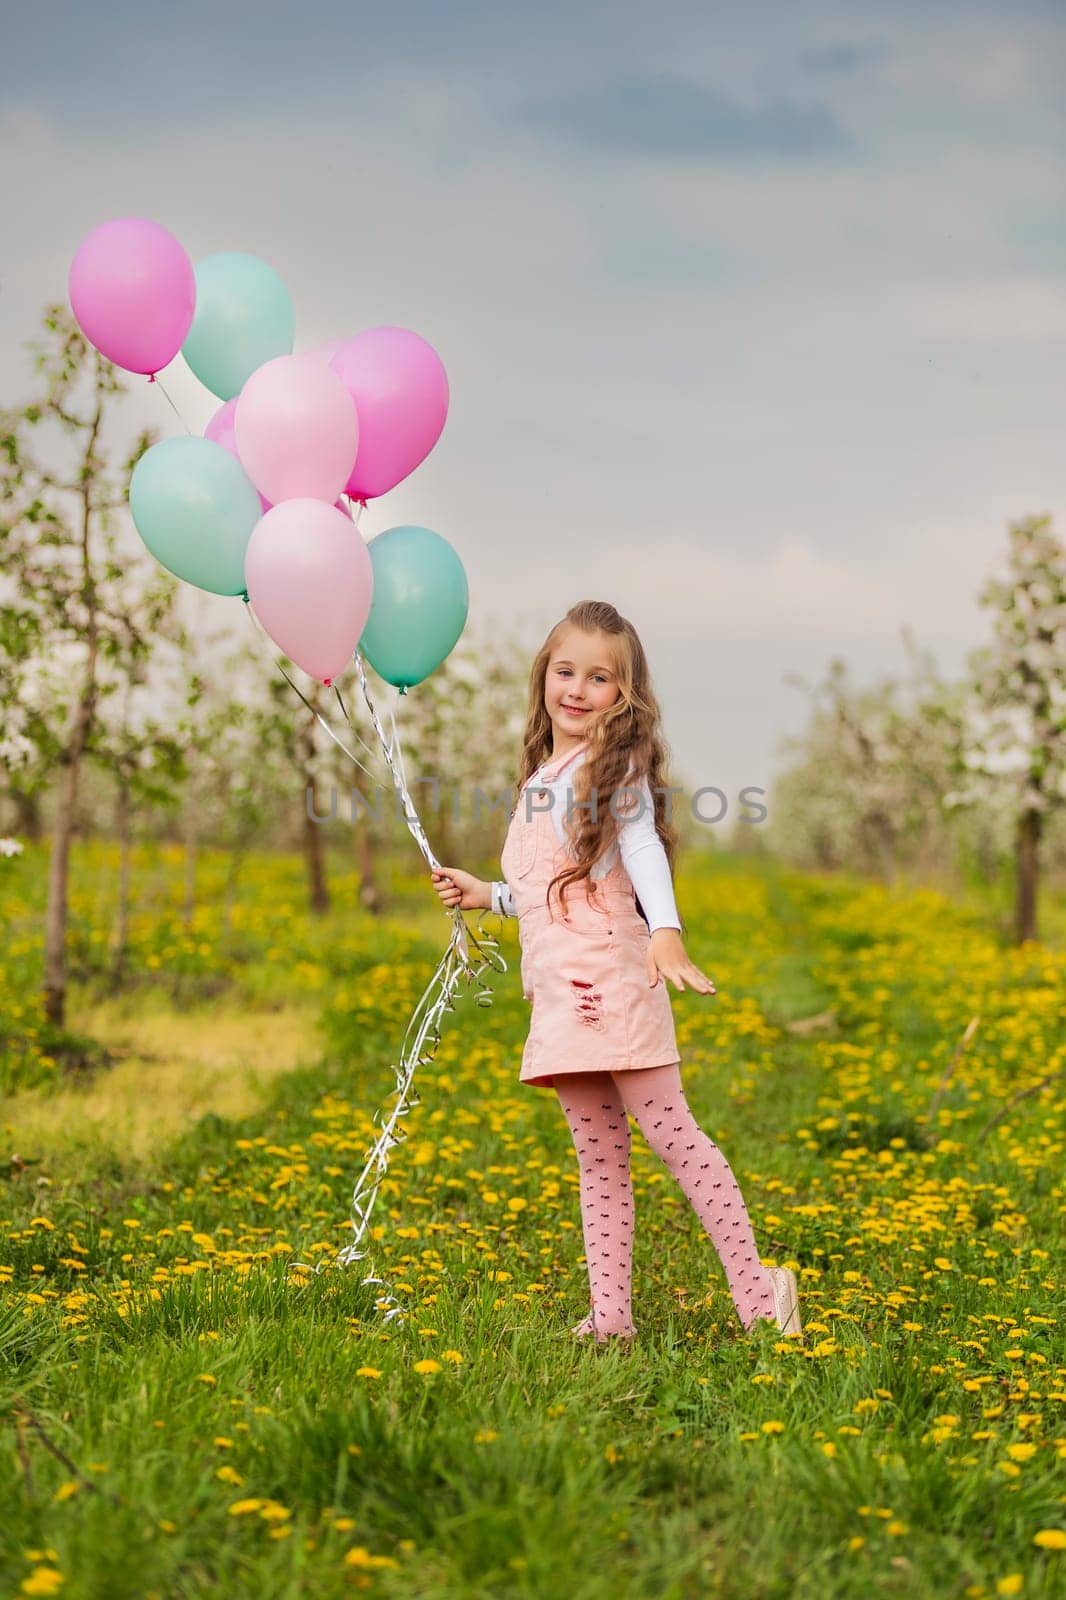 girl with colorful balloons in a blooming garden with trees